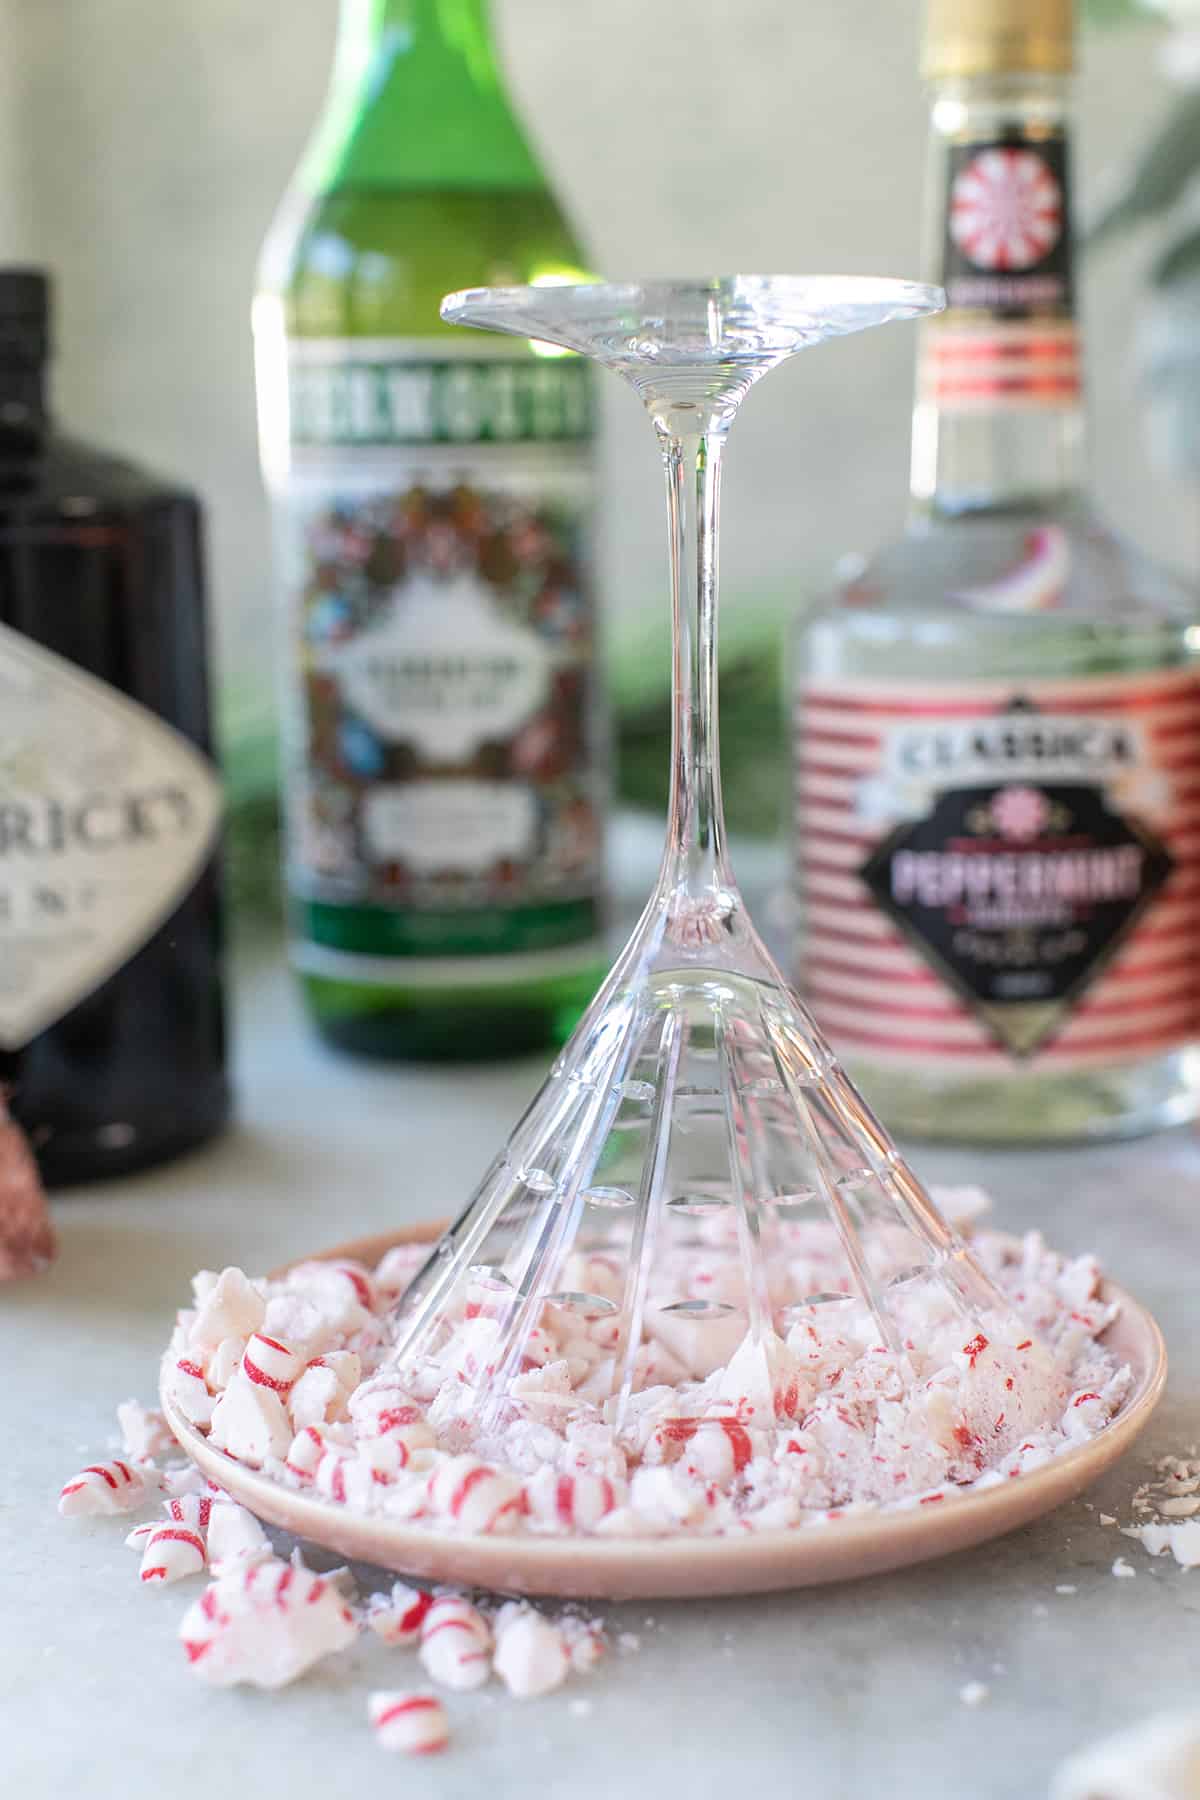 riming a martini glass glass with crushed candy canes